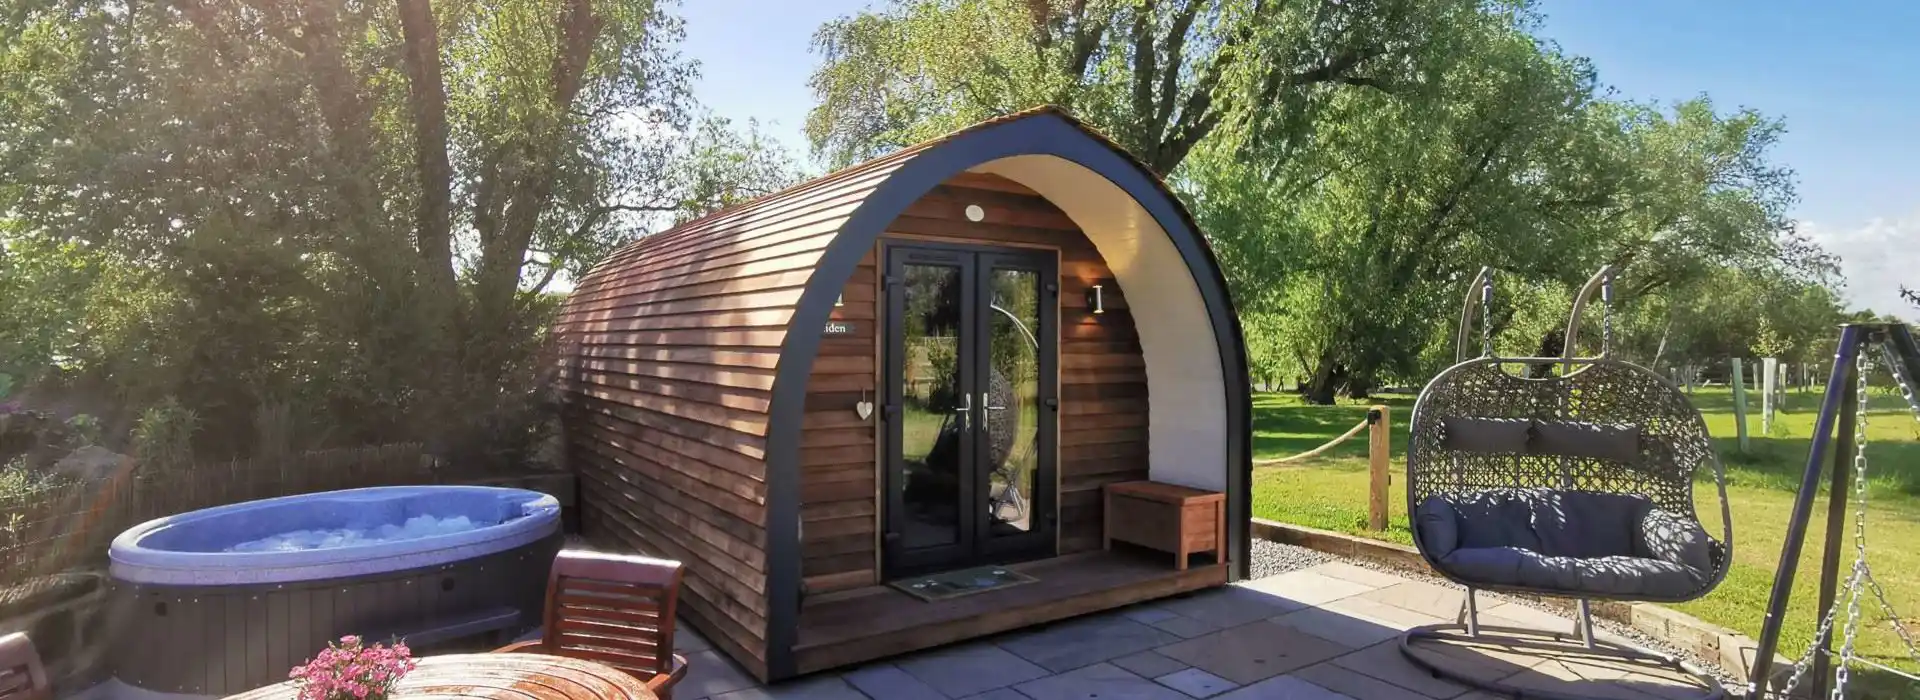 Glamping pods and camping pods